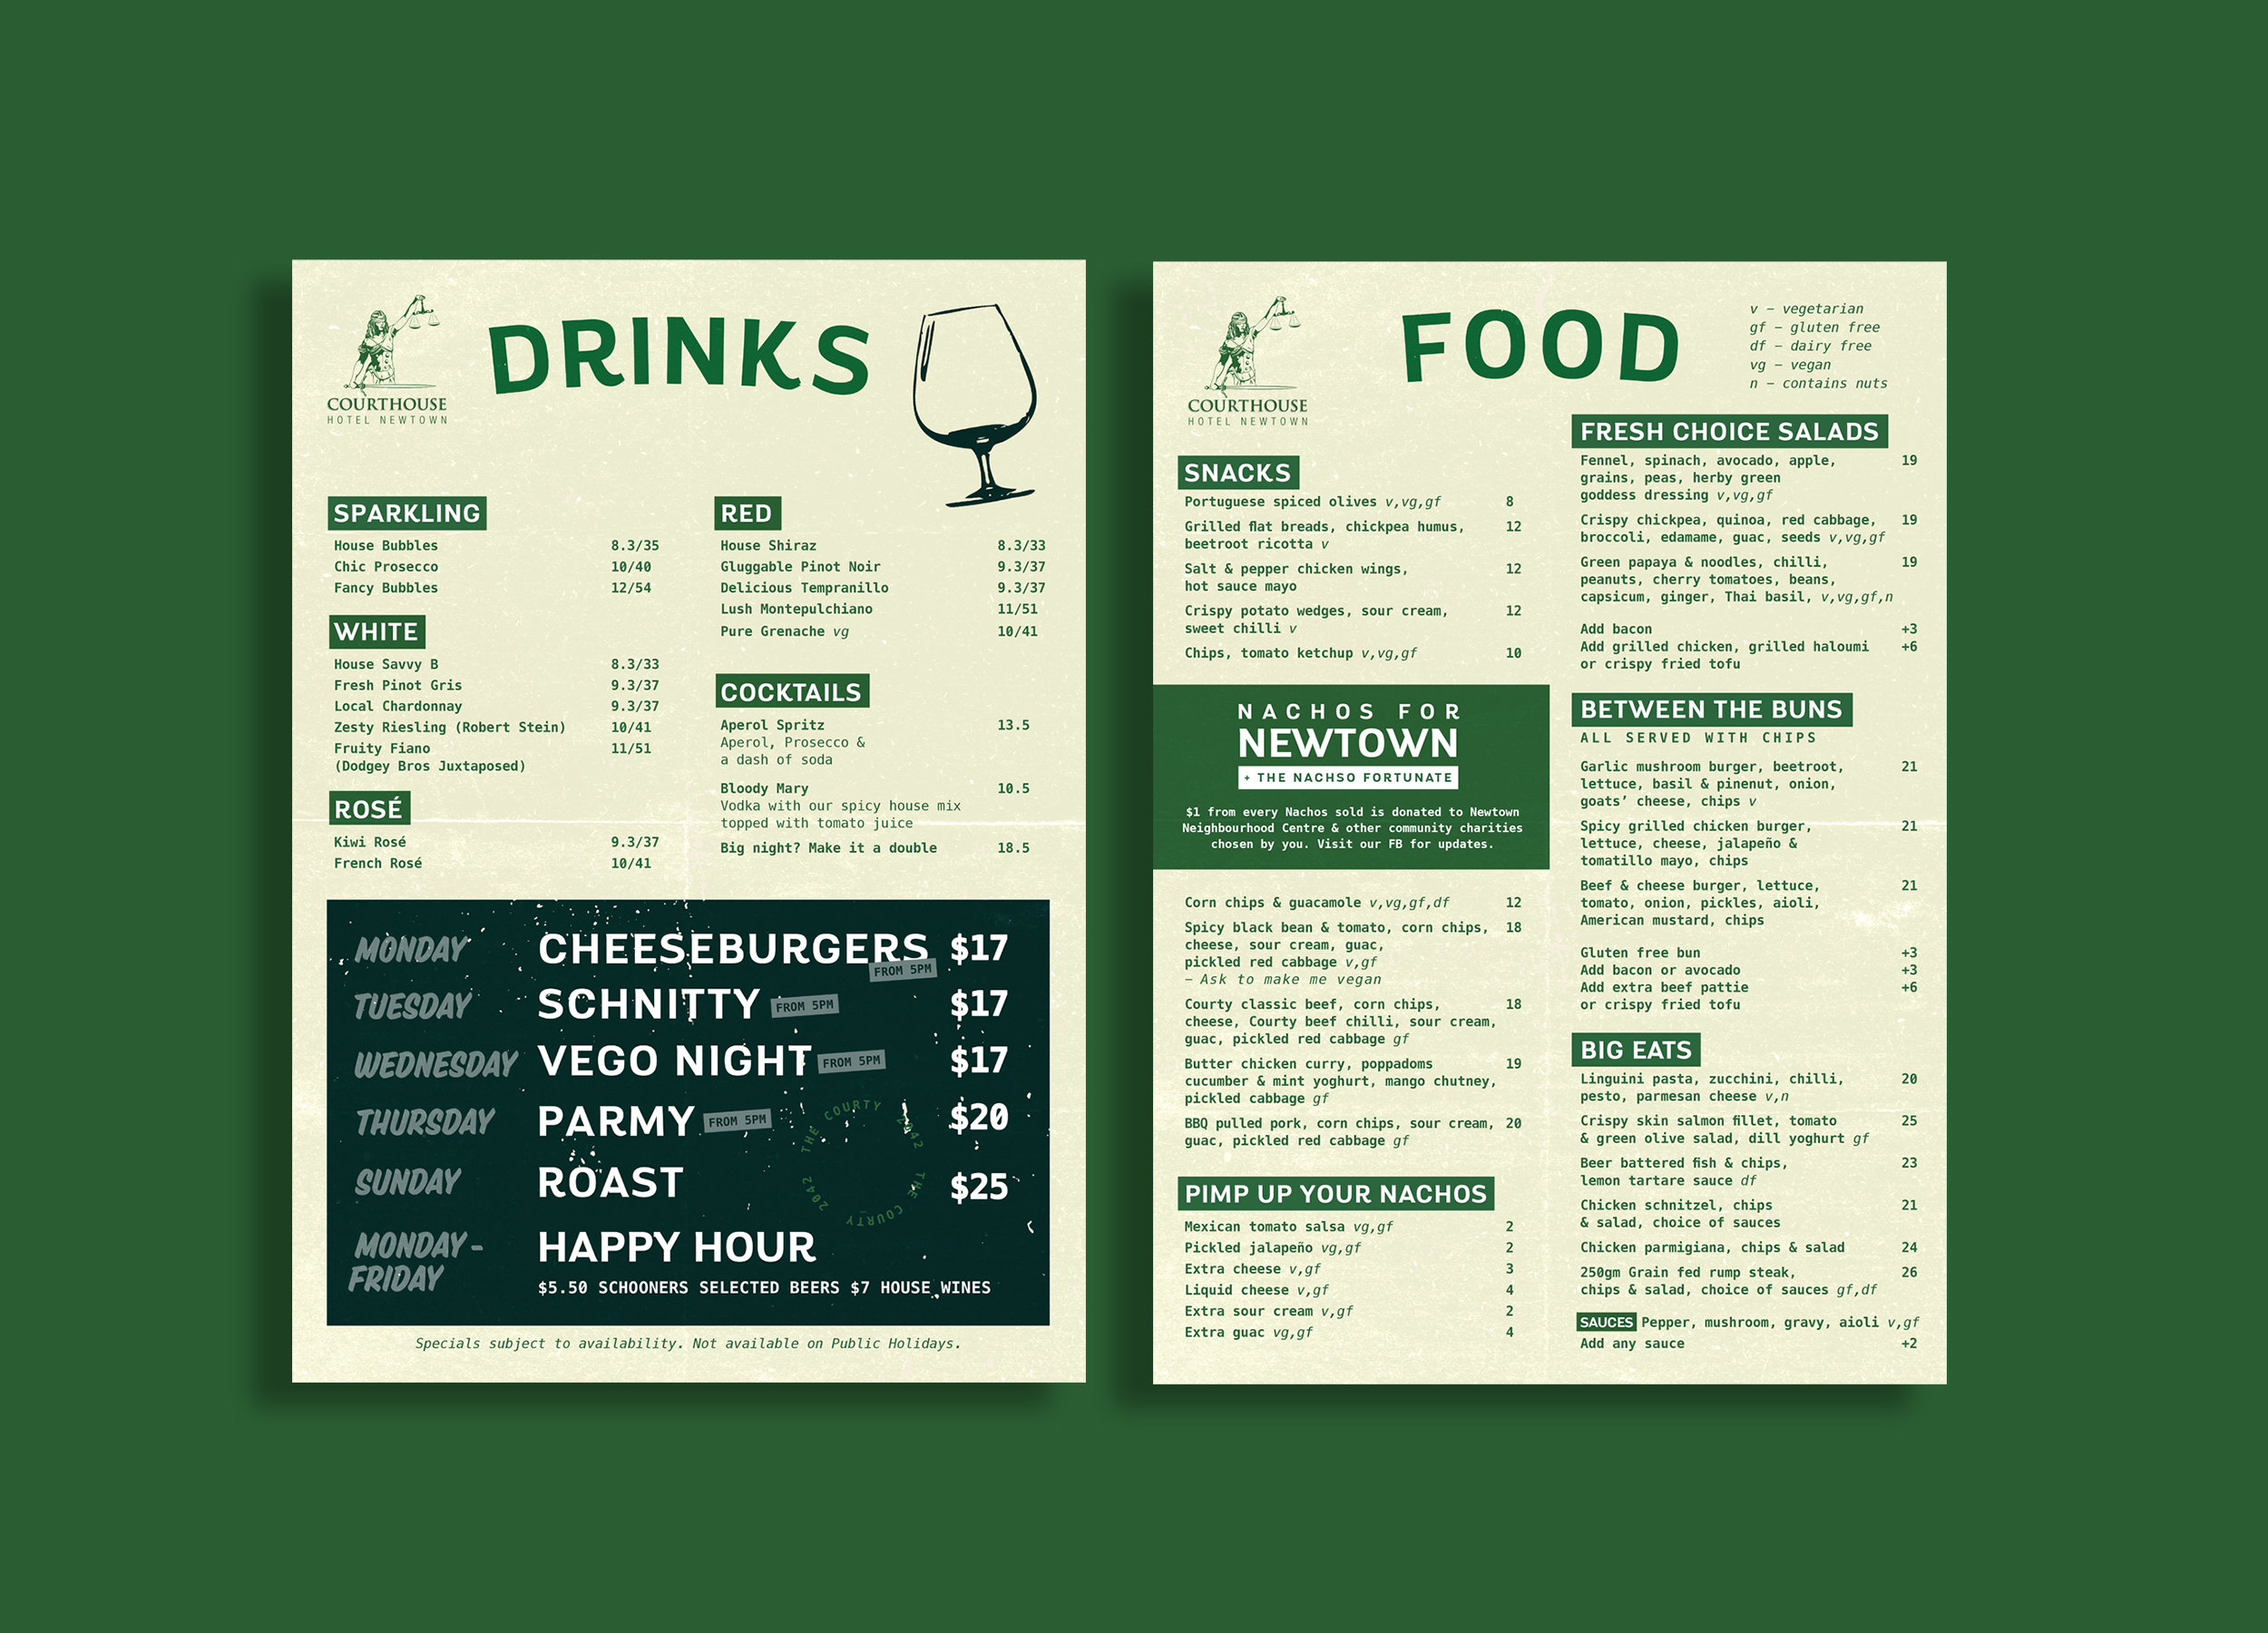 A menu design with a good layout that is easy to read